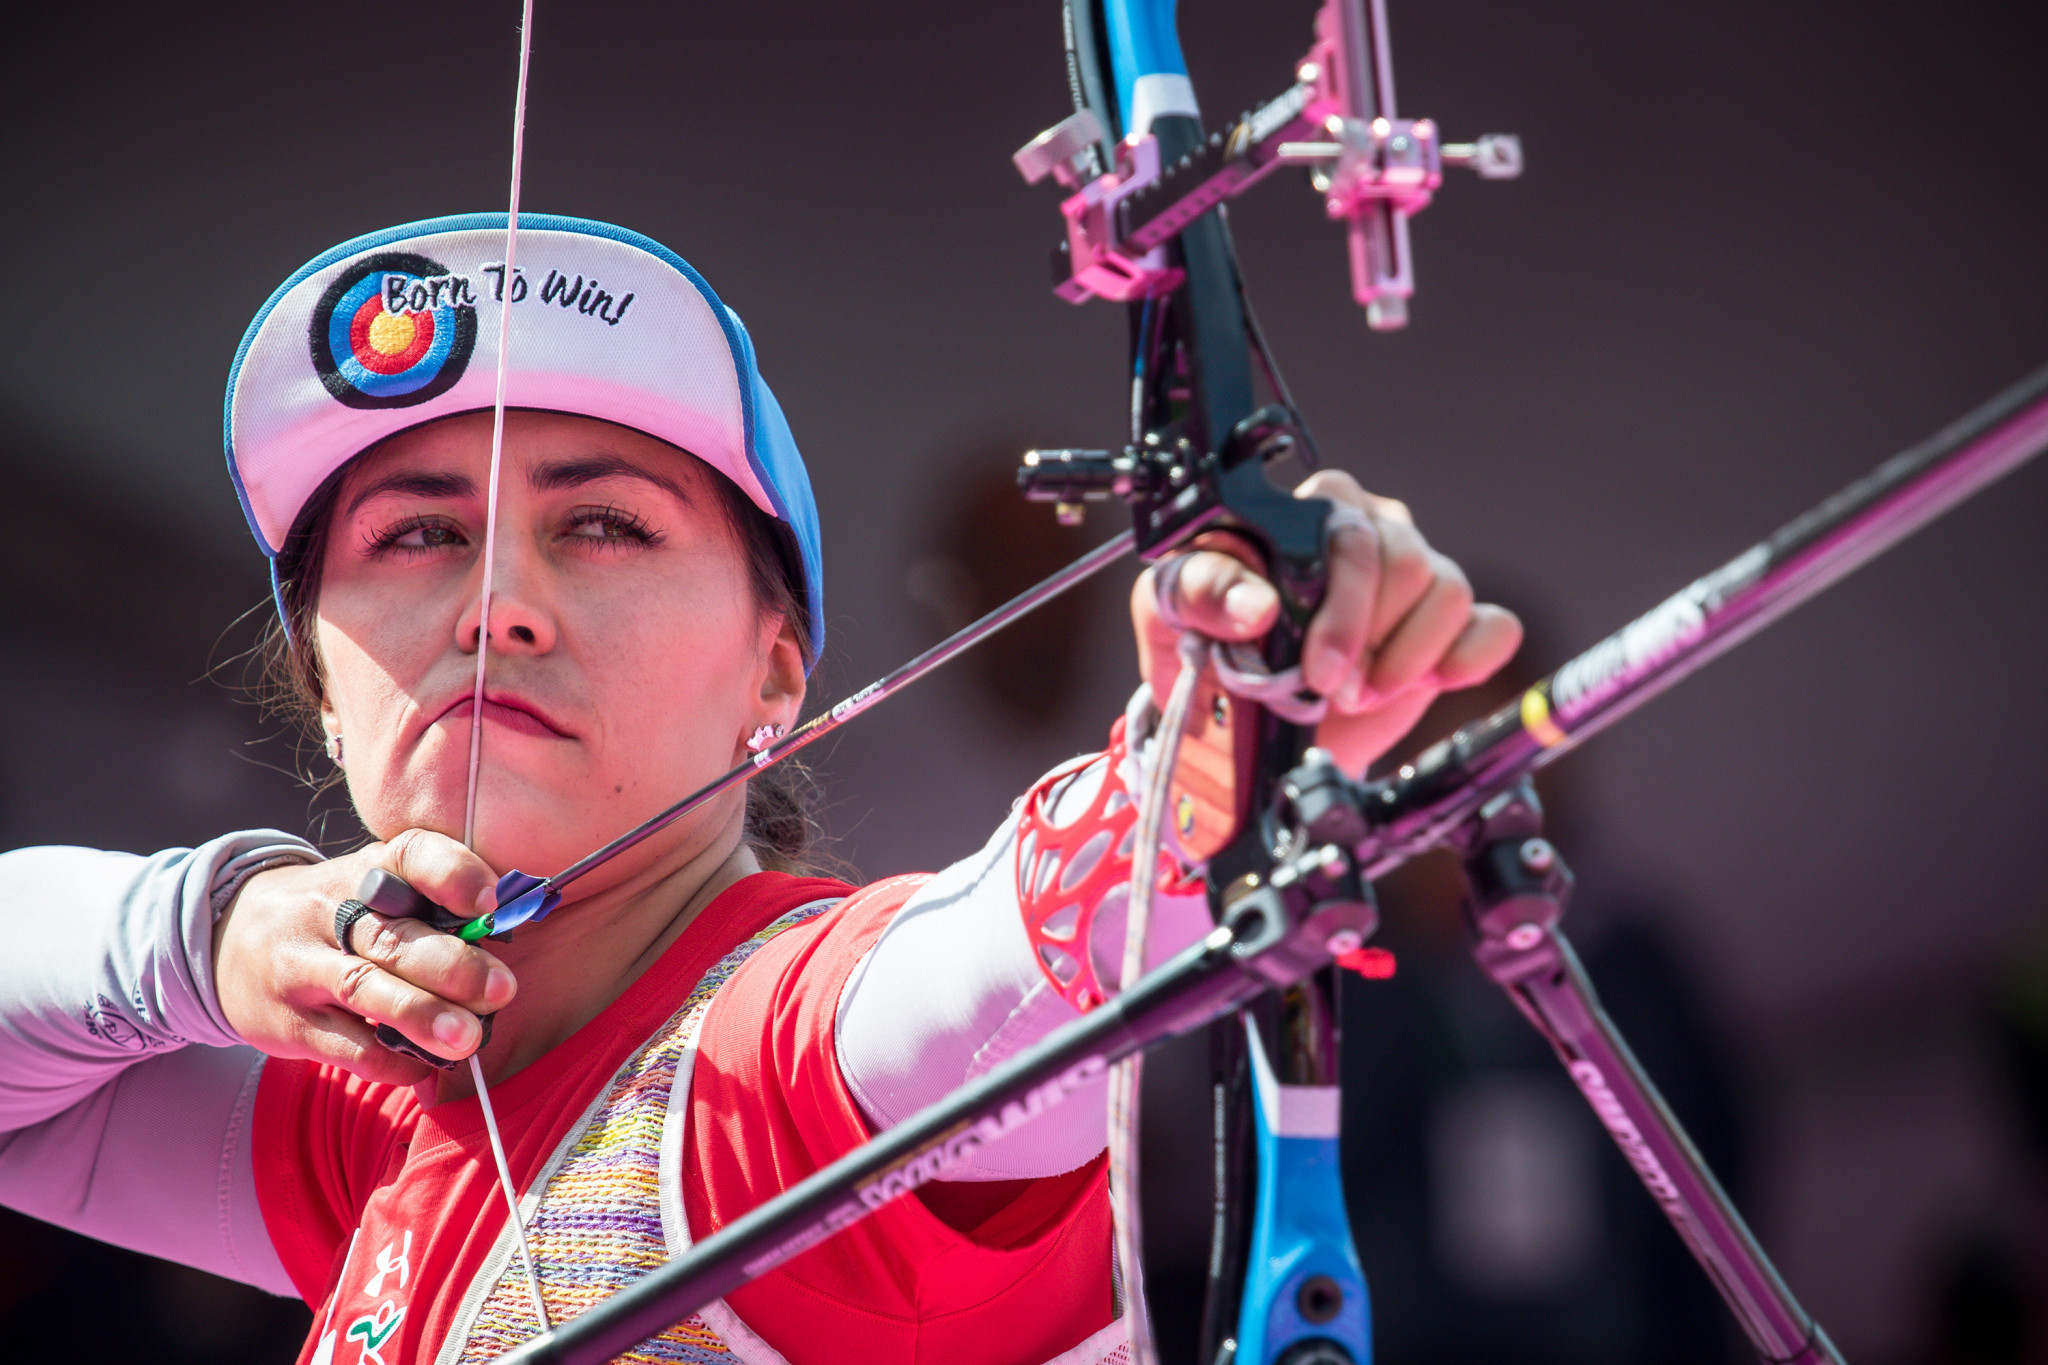 Roman beats former team-mate to Indoor Archery World Cup honours